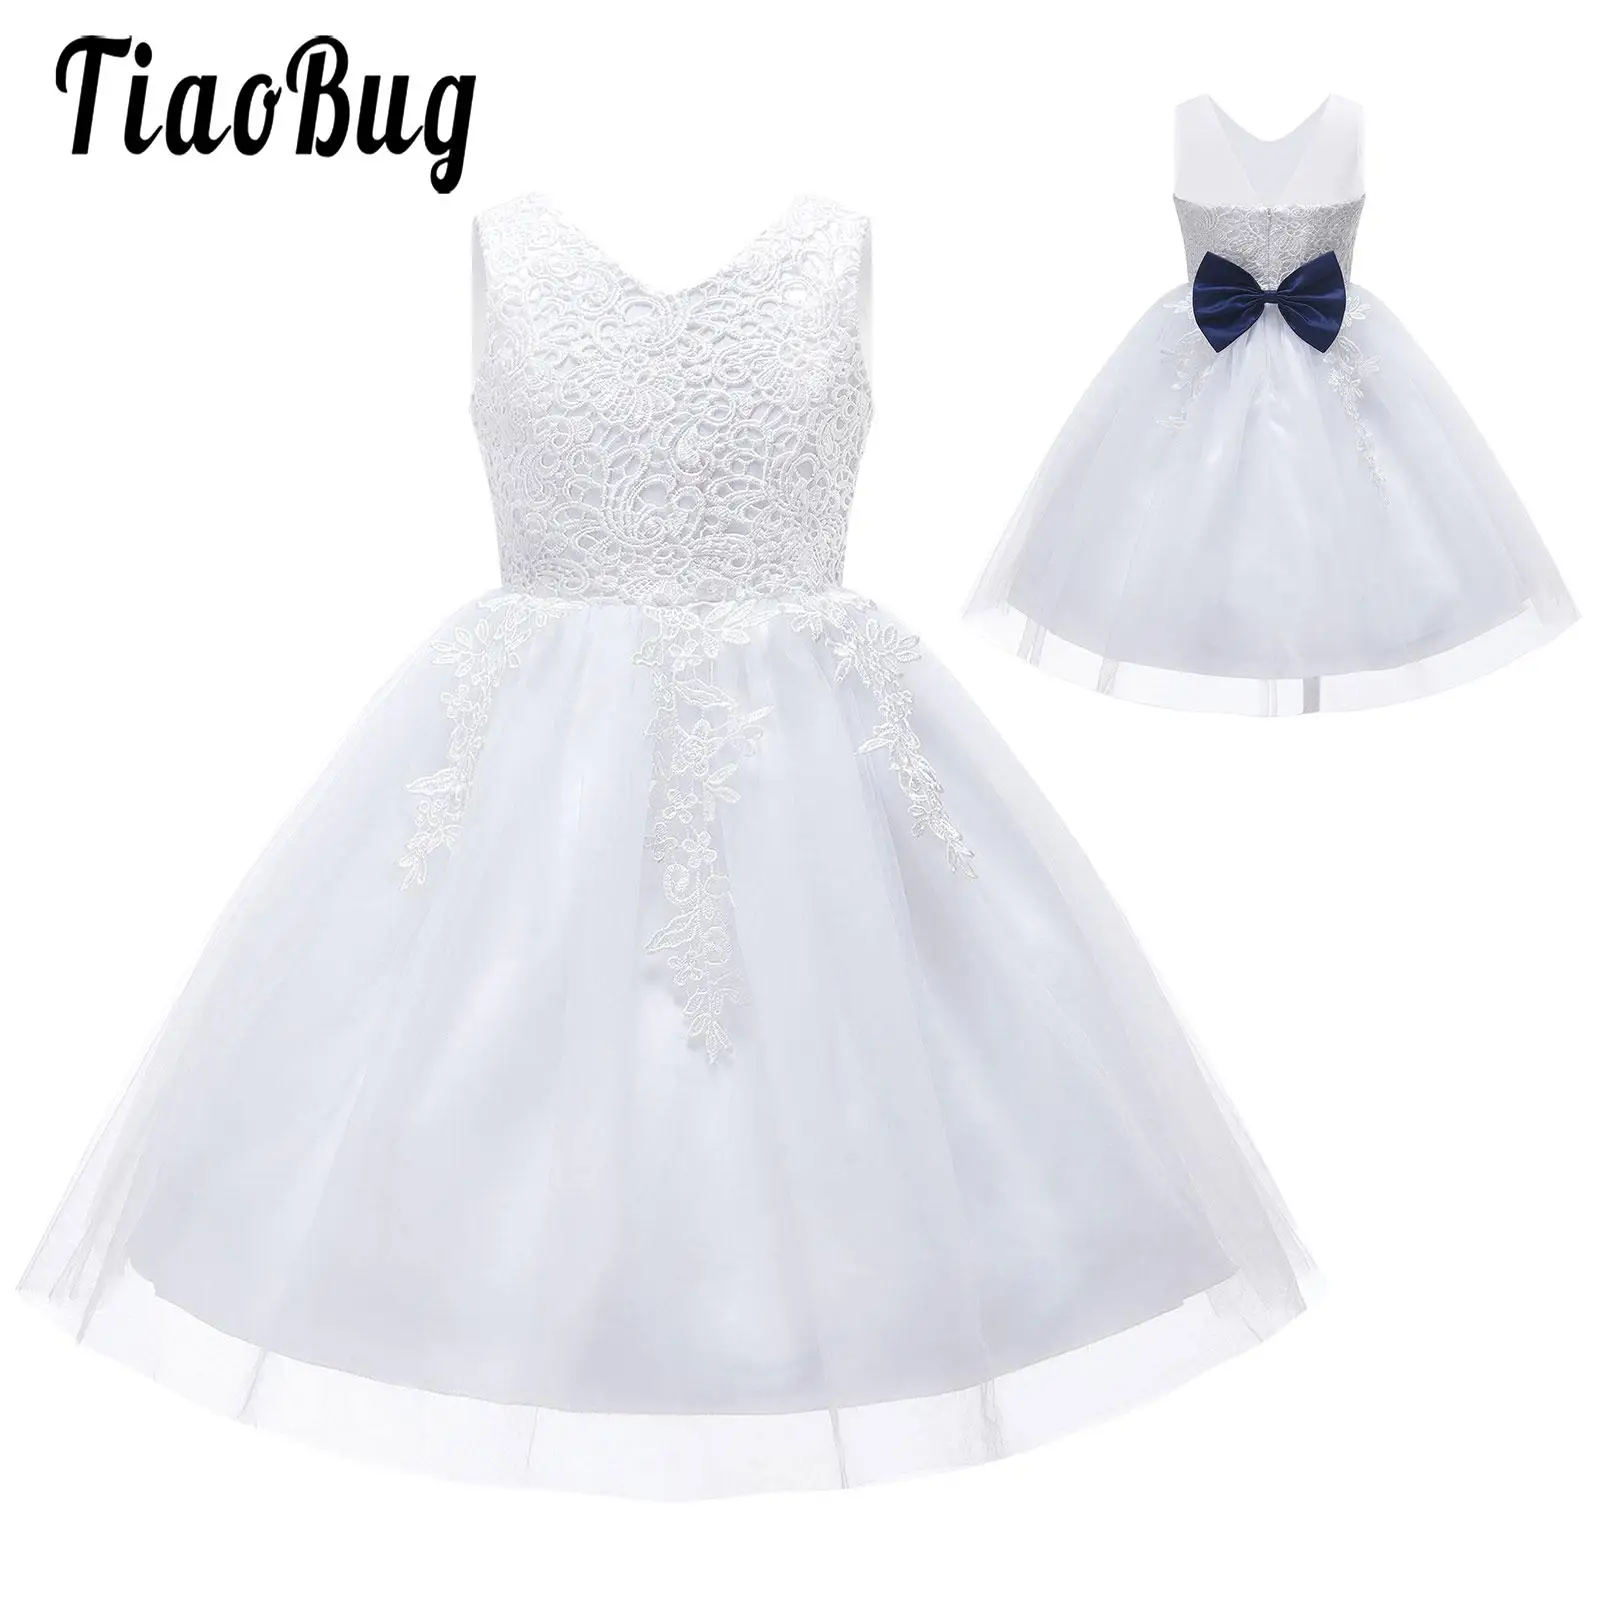 

Baby Girls Lace Floral Bow Princess Dress Infant 1st Birthday Party Ball Gown Girl White Baptism Tutu Costume Christening Party